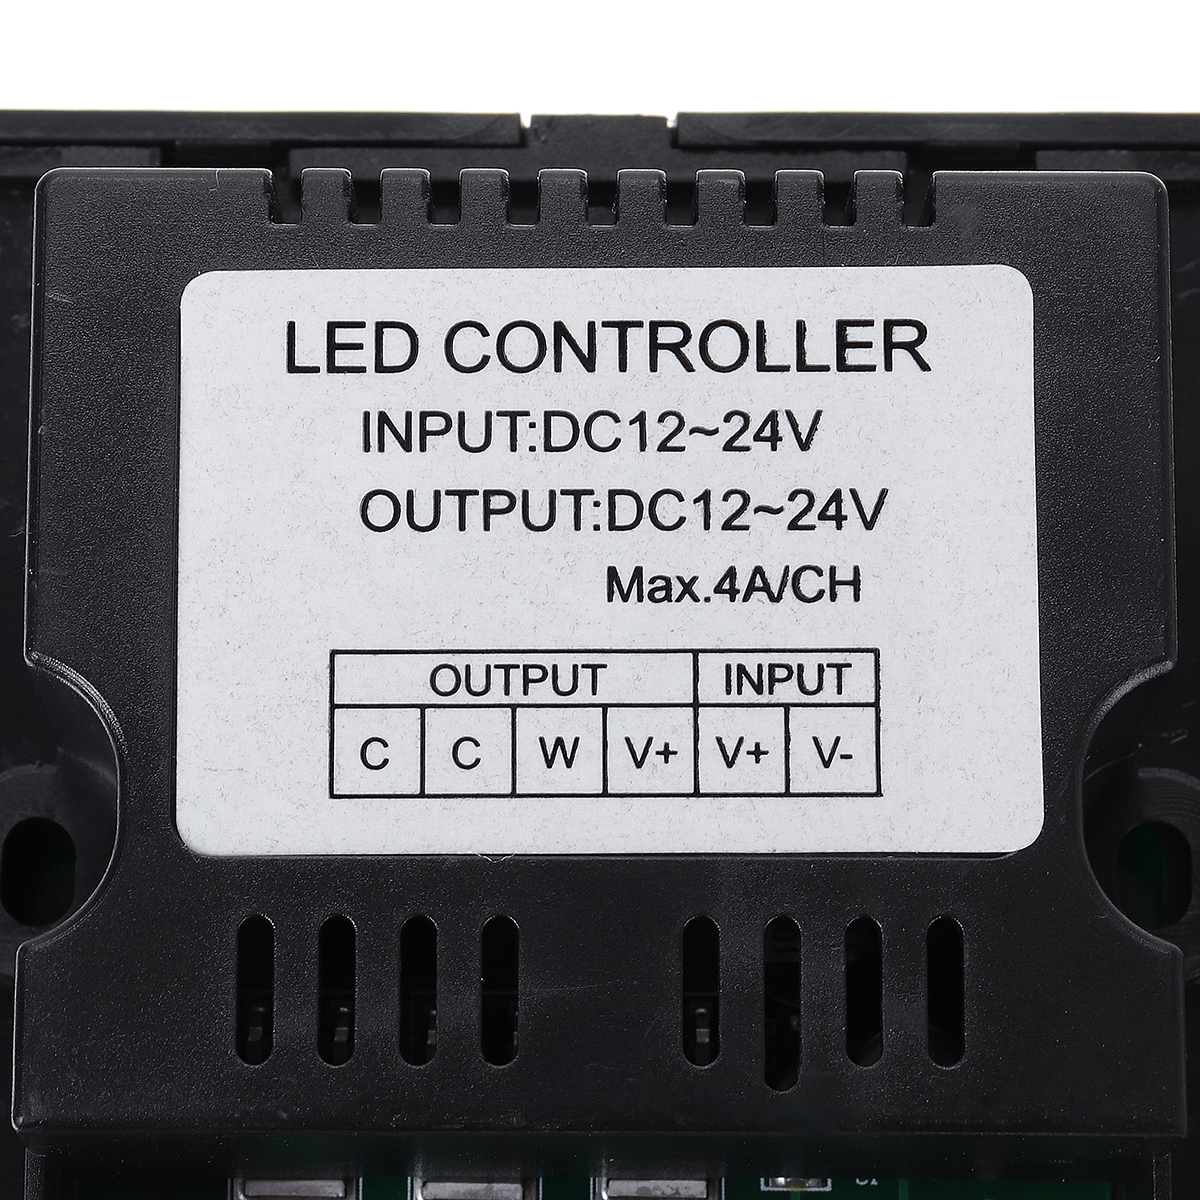 DC-12V-24V-LED-Light-Dimmer-Controller-Switch-Wall-Mounted-Sensitive-Touch-Panel-Dimmer-Switch-1610039-8